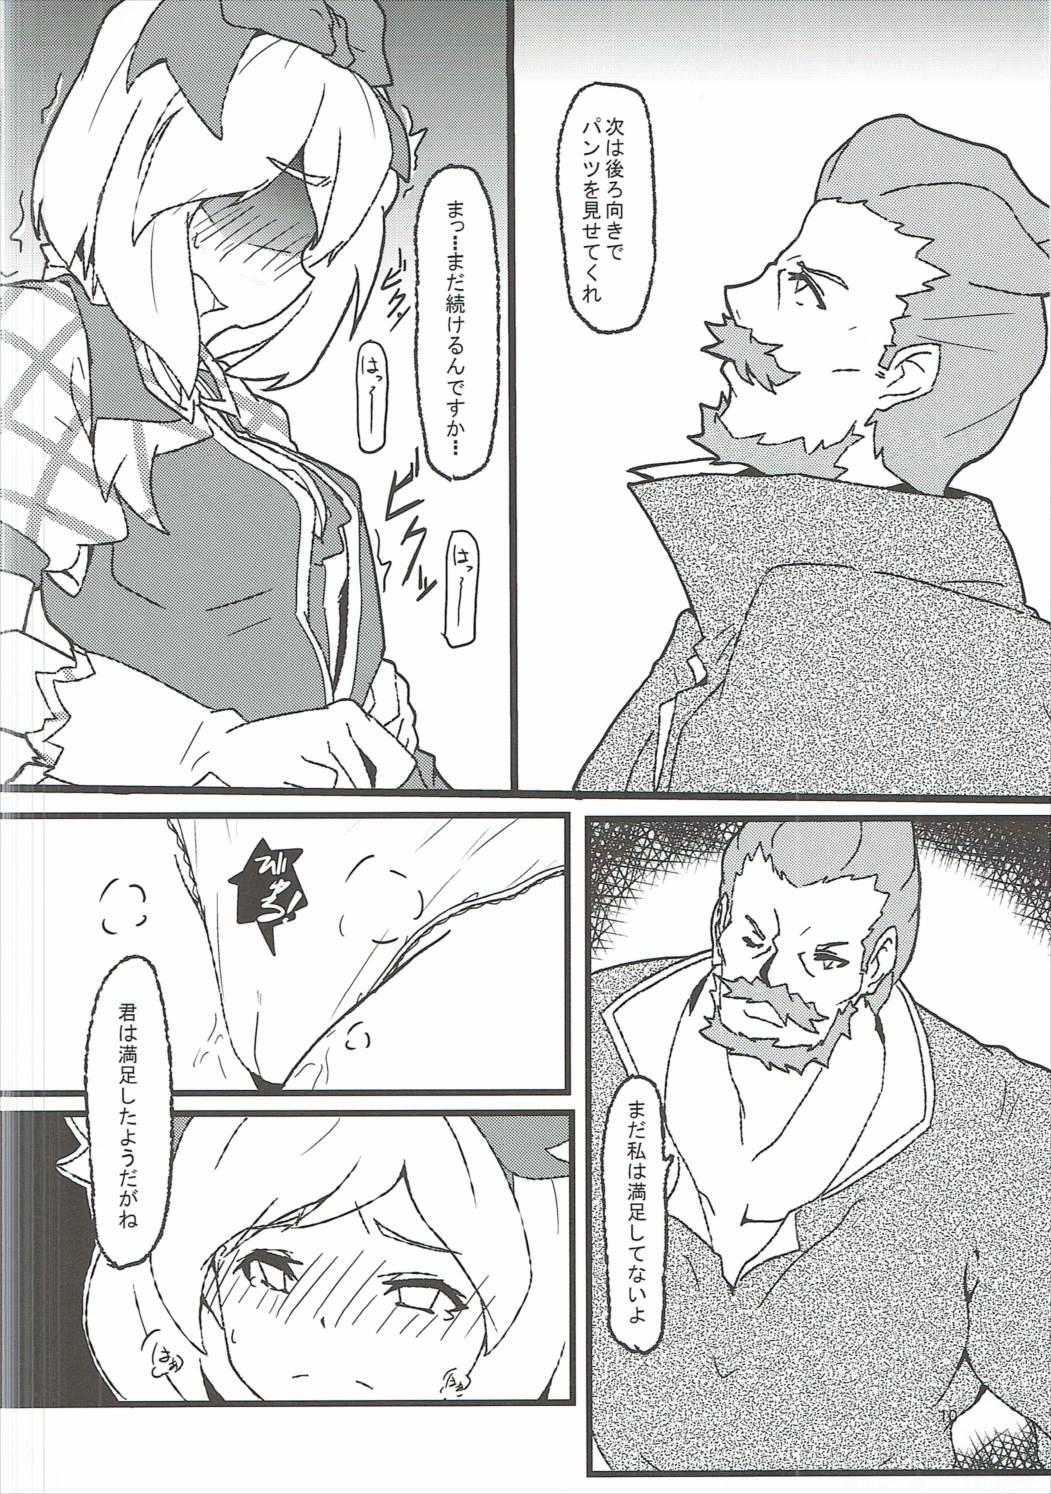 Butts Surprise Ticket - Granblue fantasy Stroking - Page 11